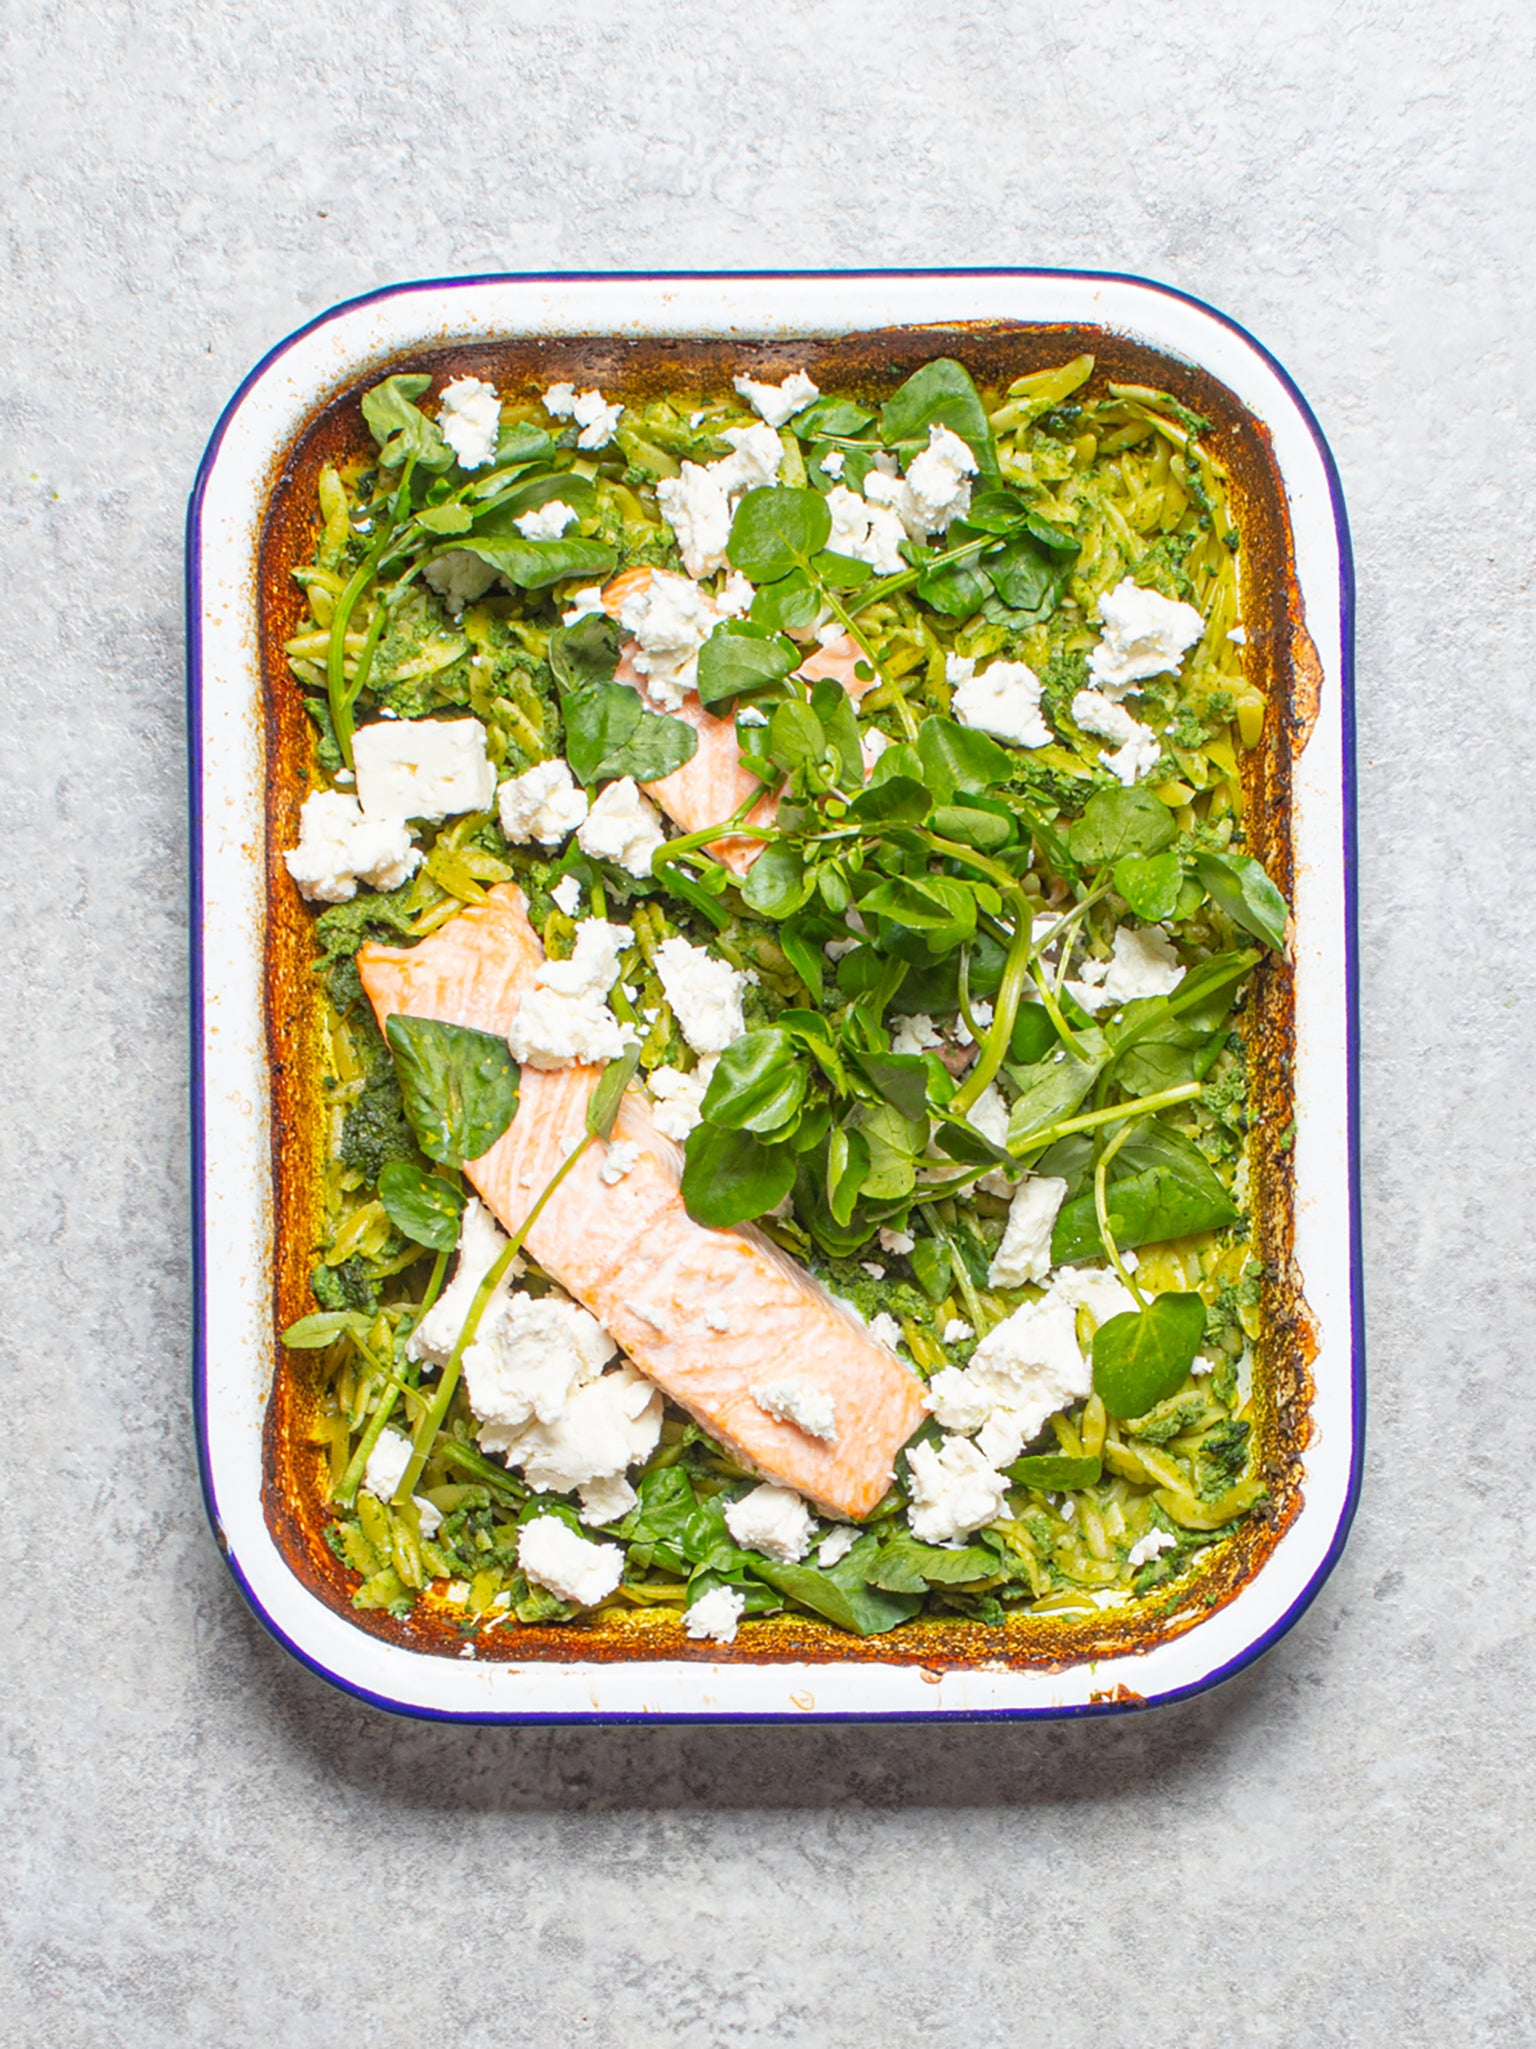 A fresh and flavourful traybake with tender salmon, watercress and creamy orzo, topped with crumbled feta